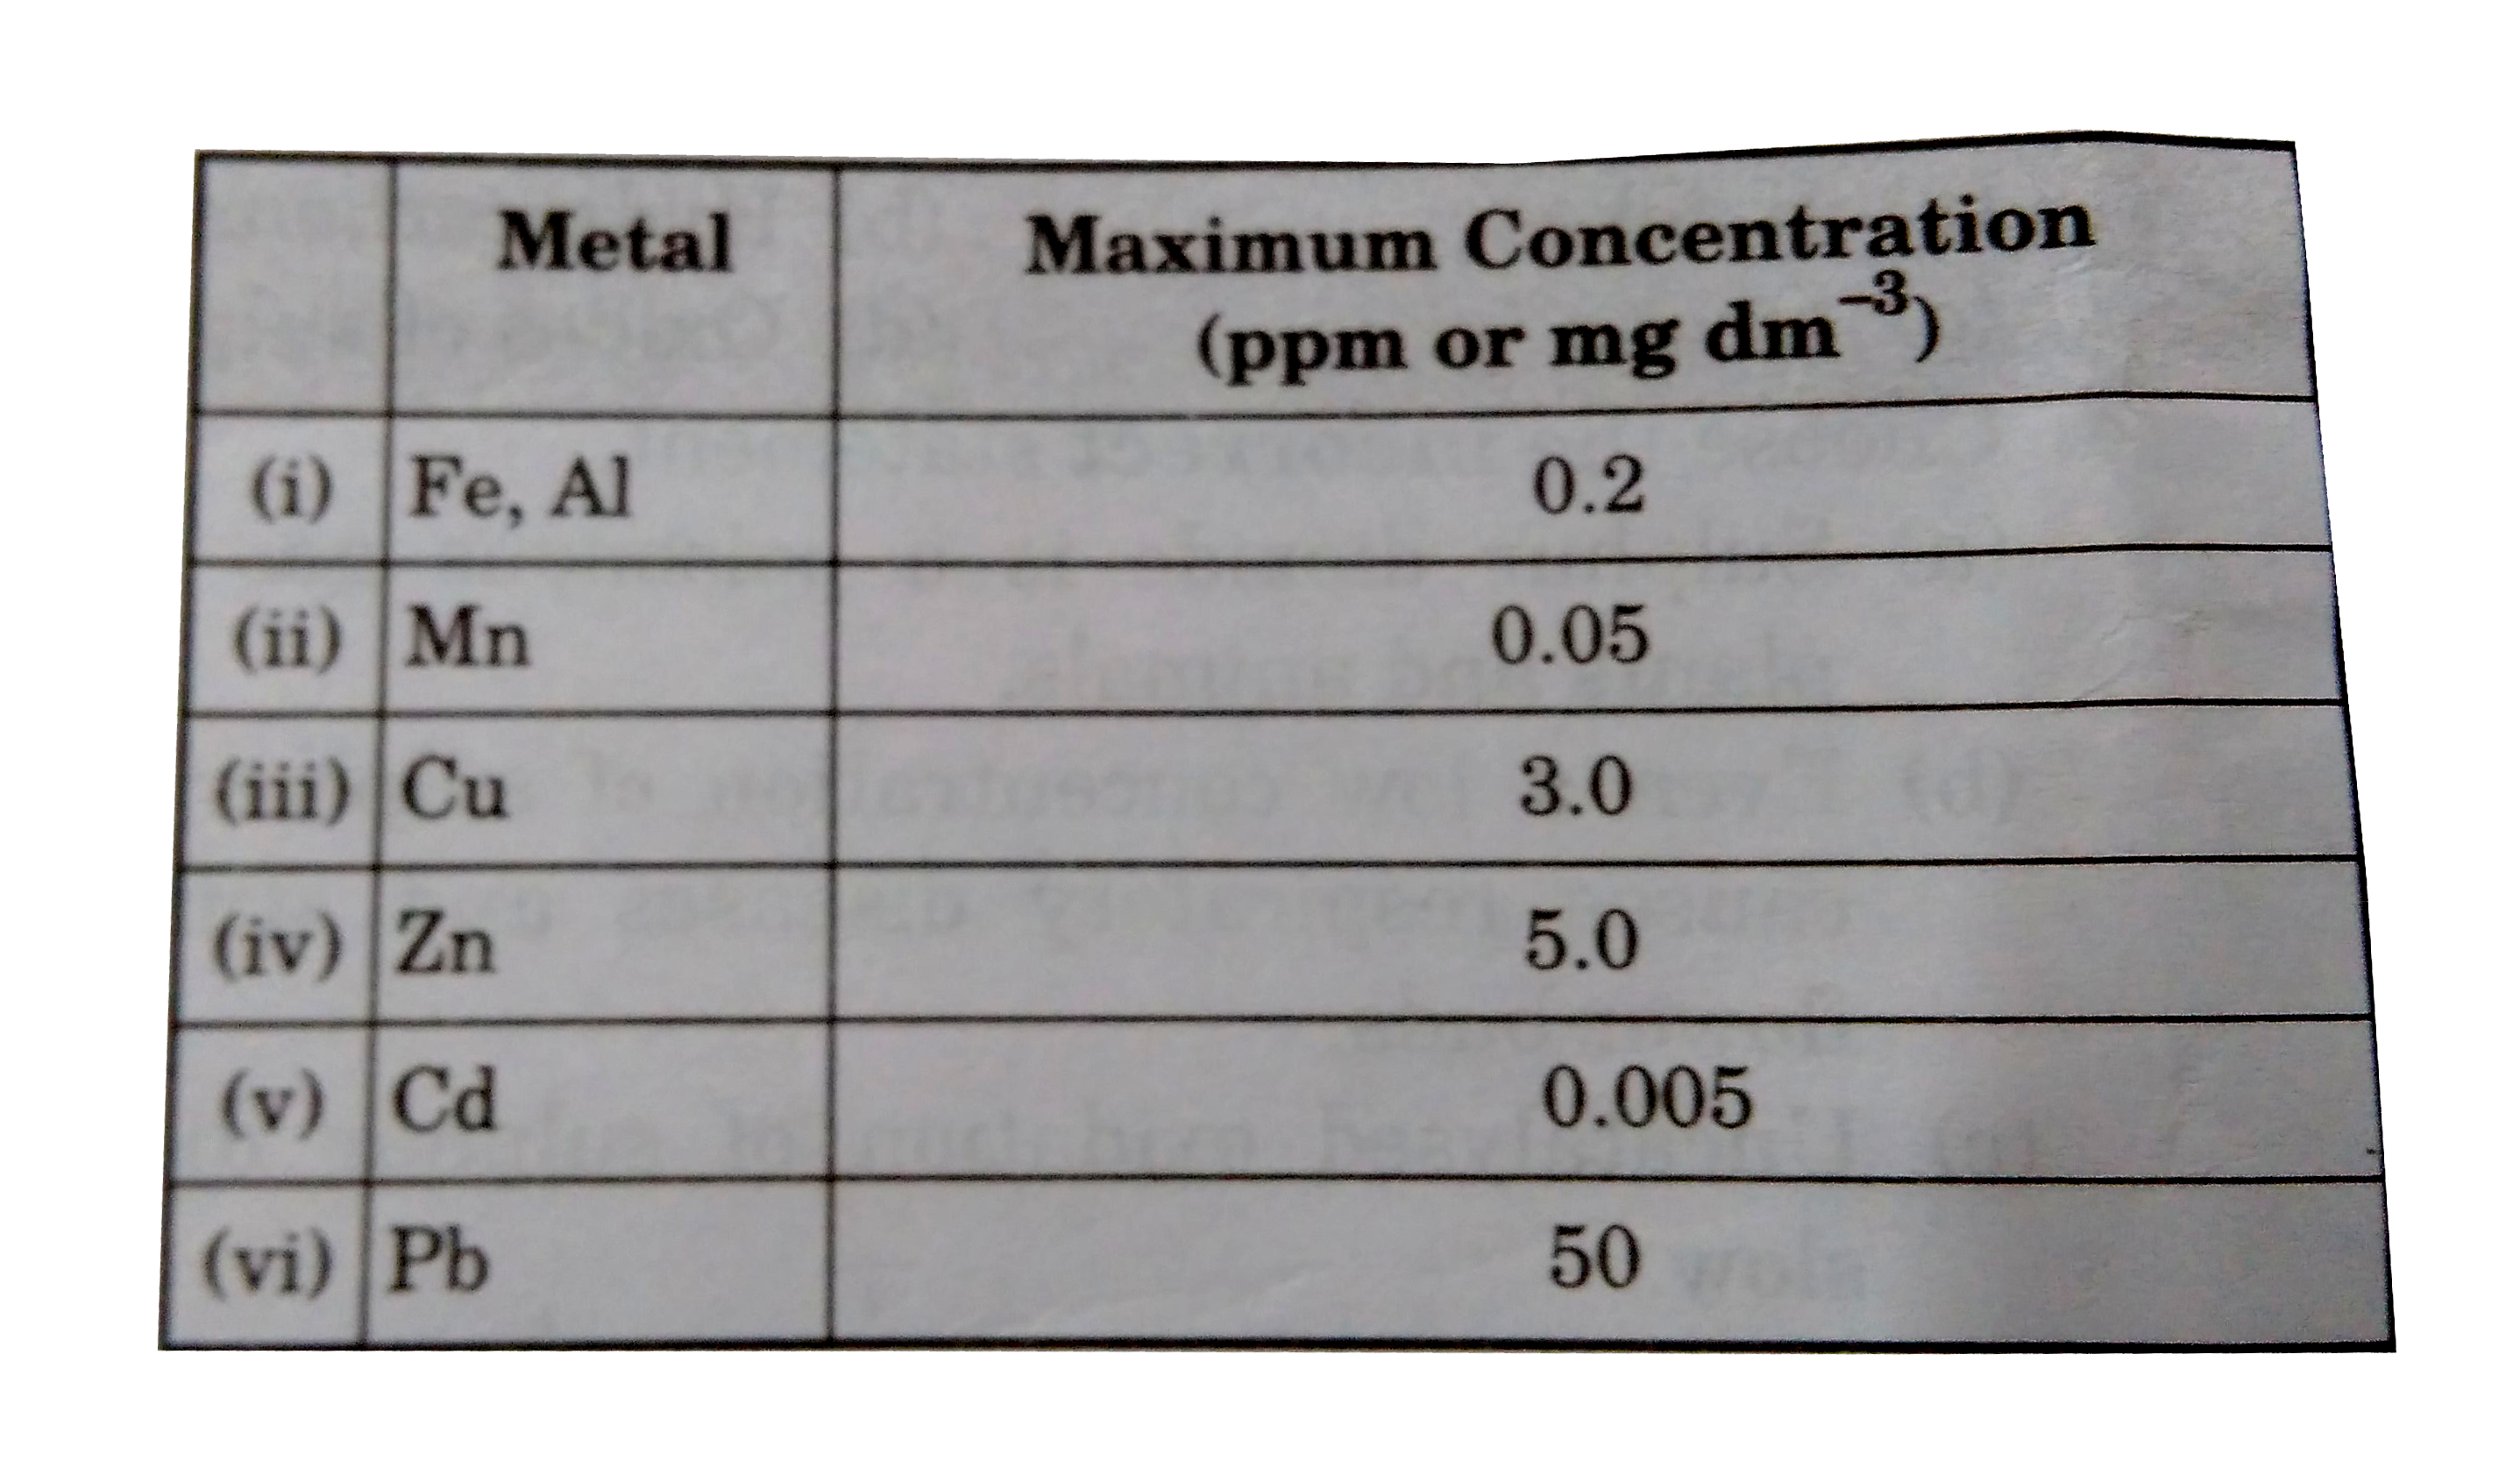 Choose the incorrect match for maximum prescribed concentration of some metals in drinking water.